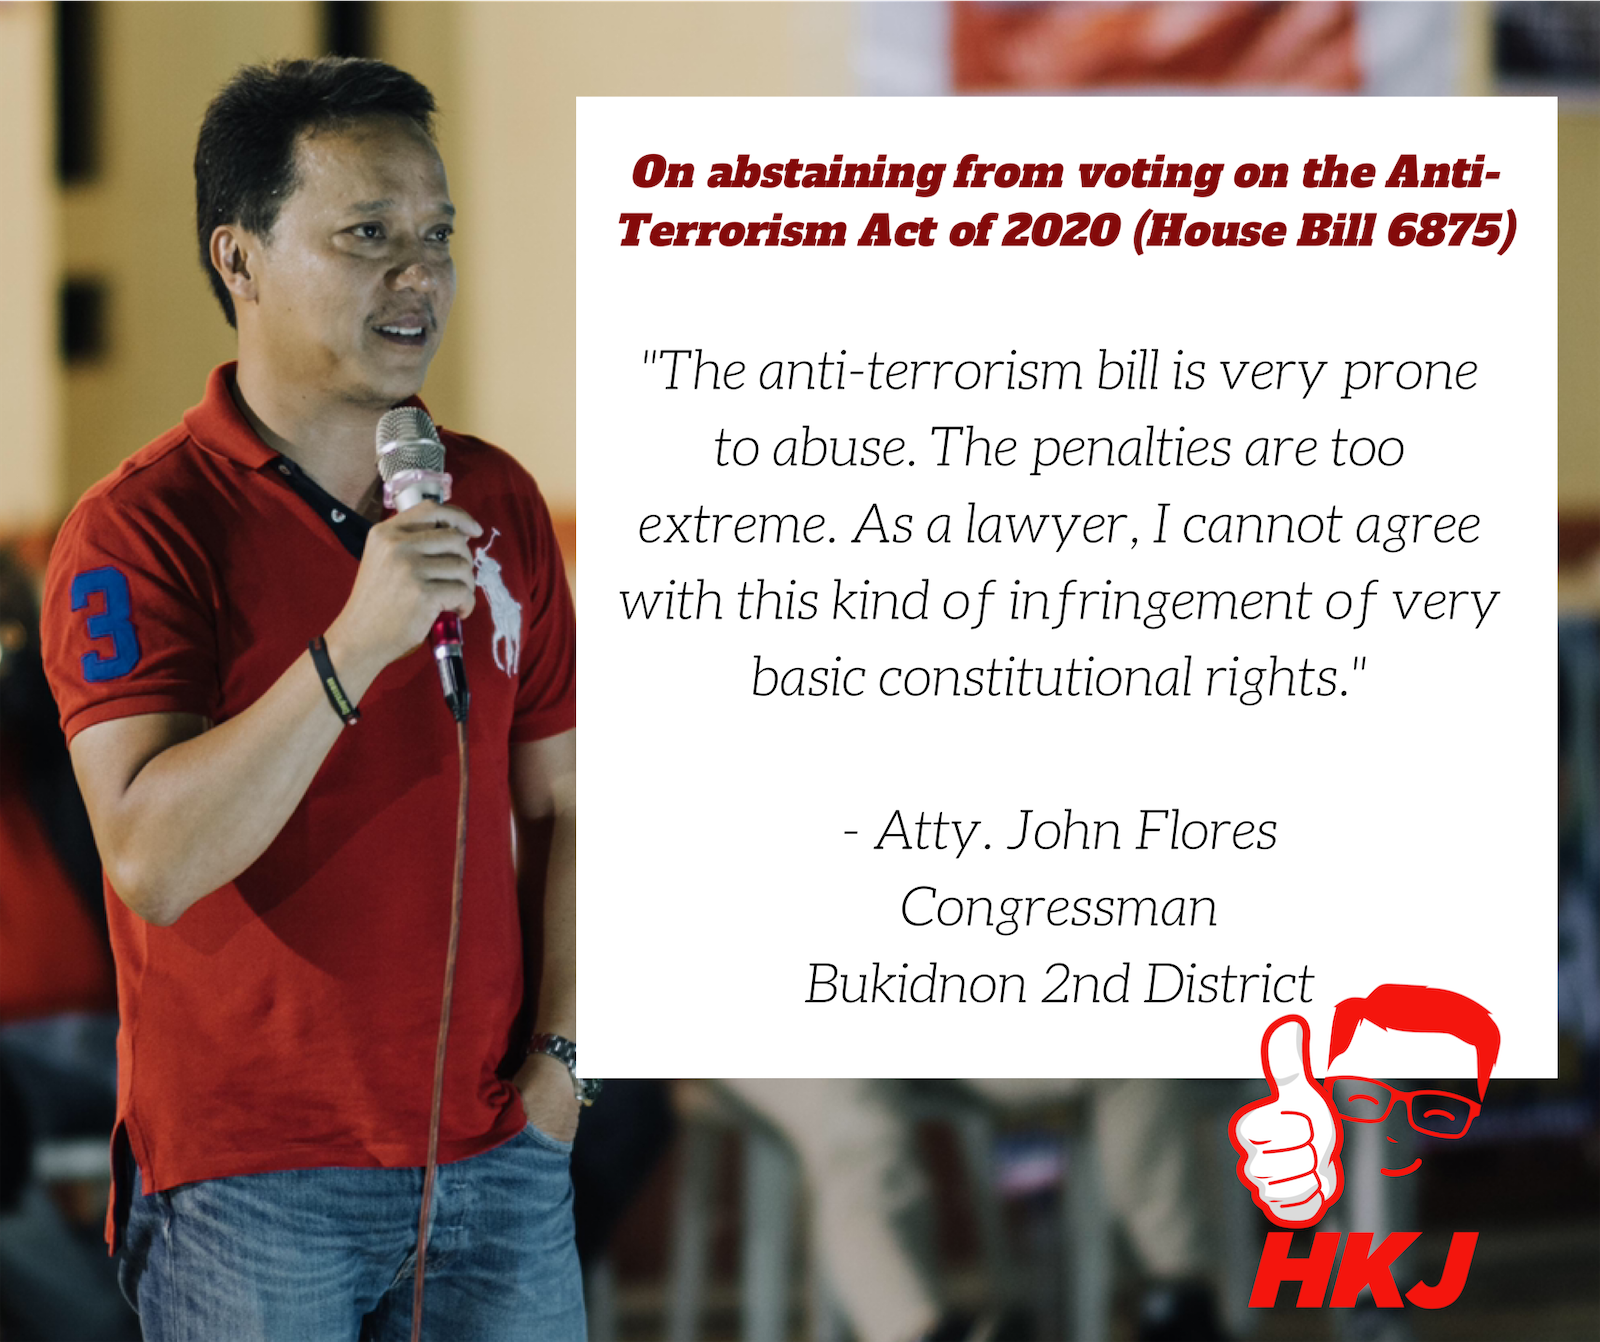 Why Bukidnon solon Flores abstained from voting on Anti-Terrorism Bill